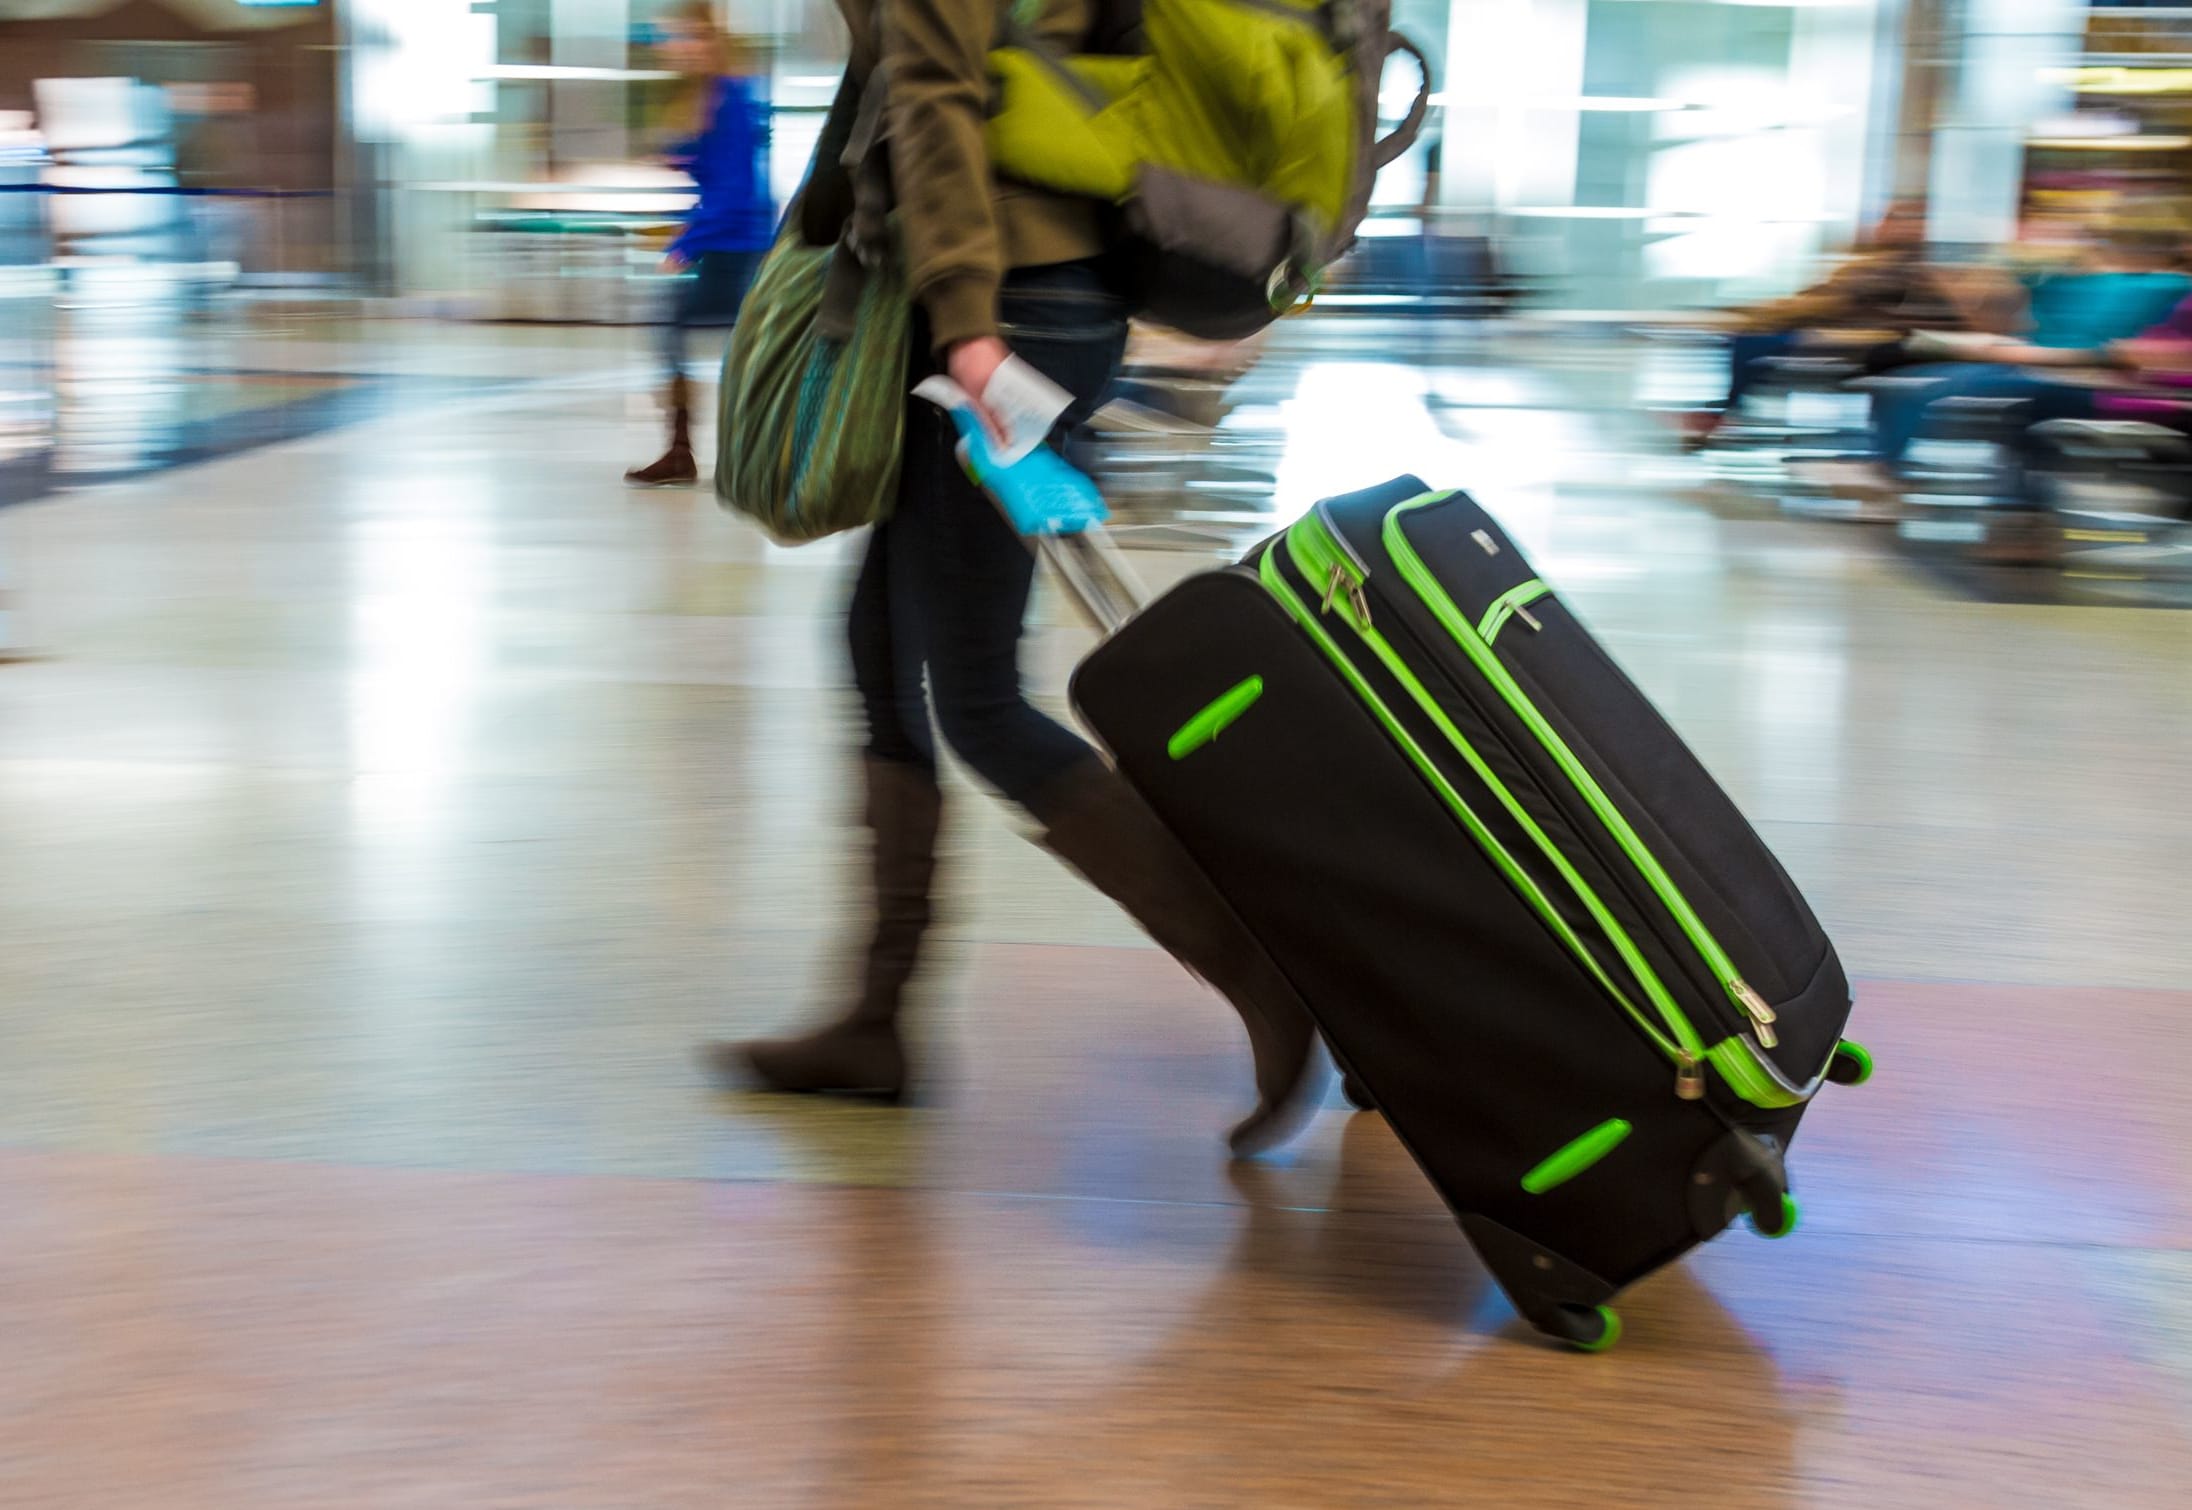 A woman with a backpack pulls a suitcase through an airport.